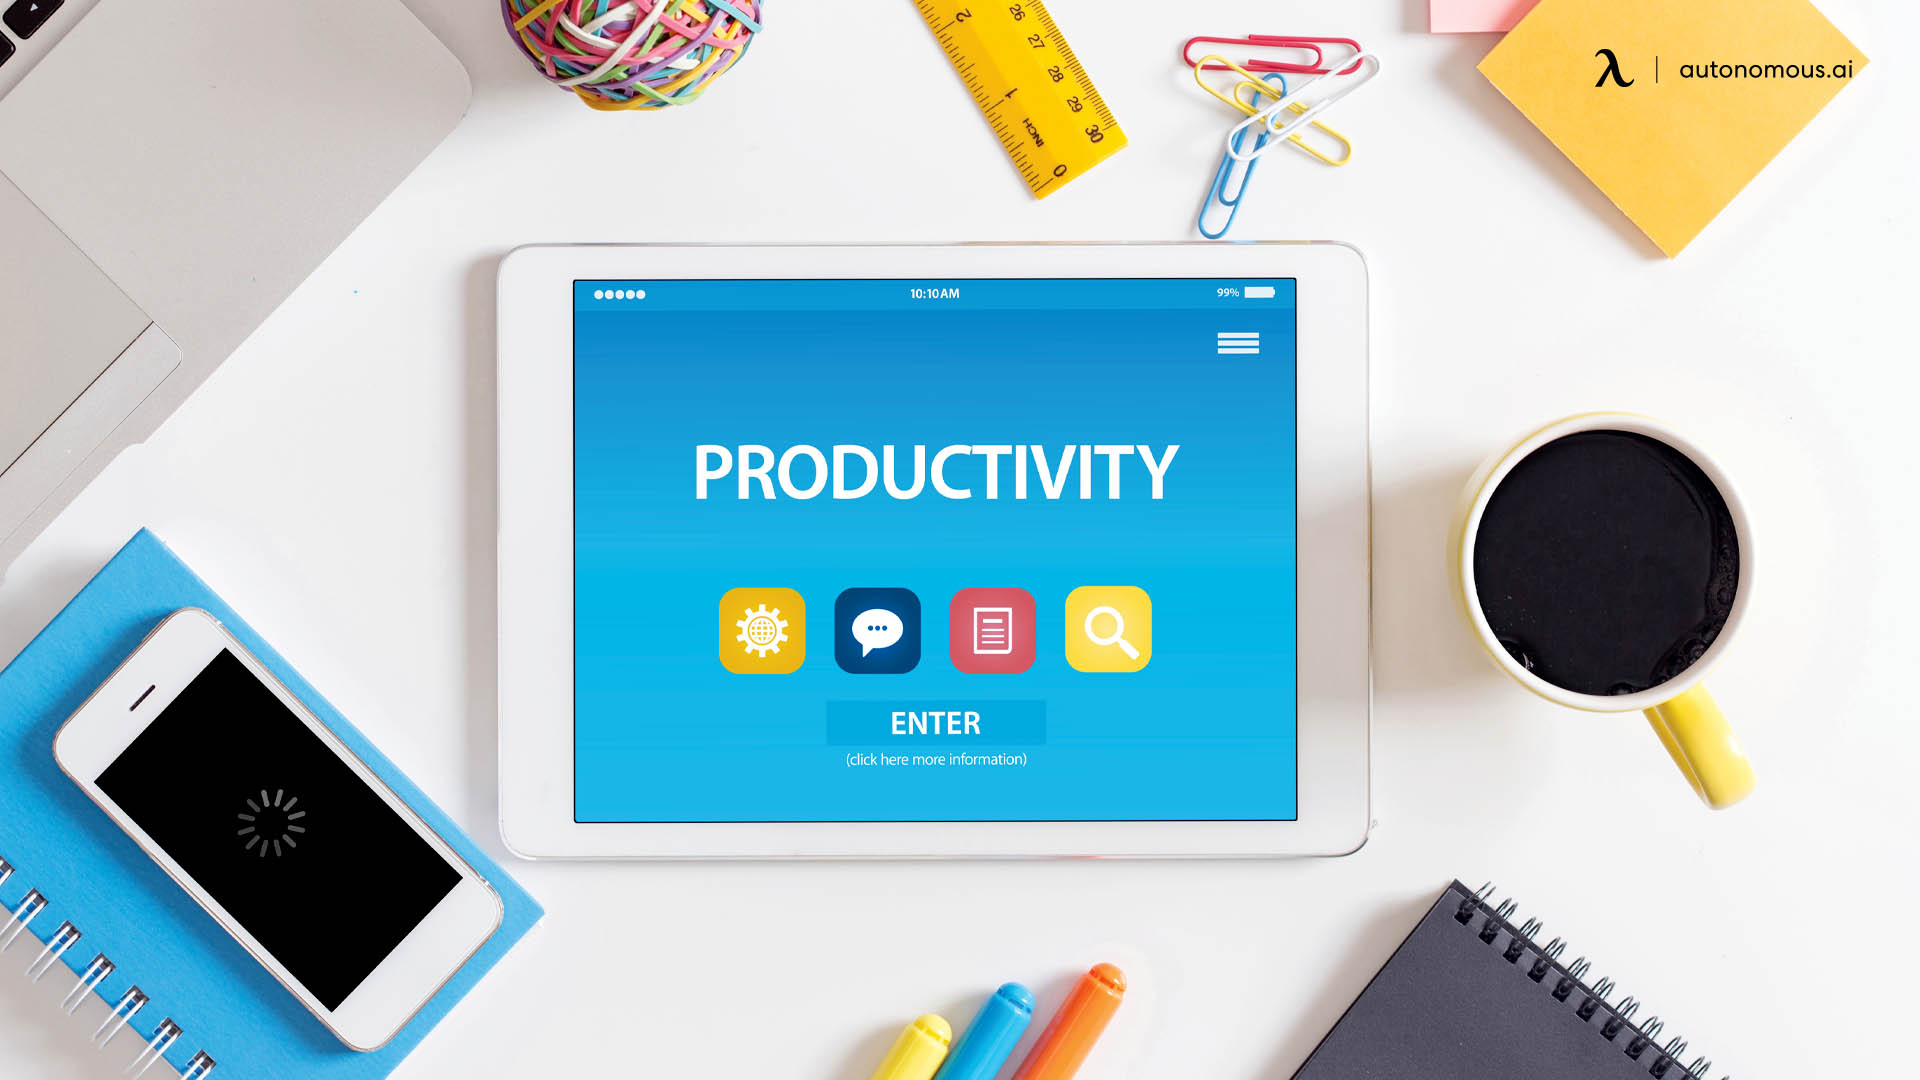 Increase in productivity